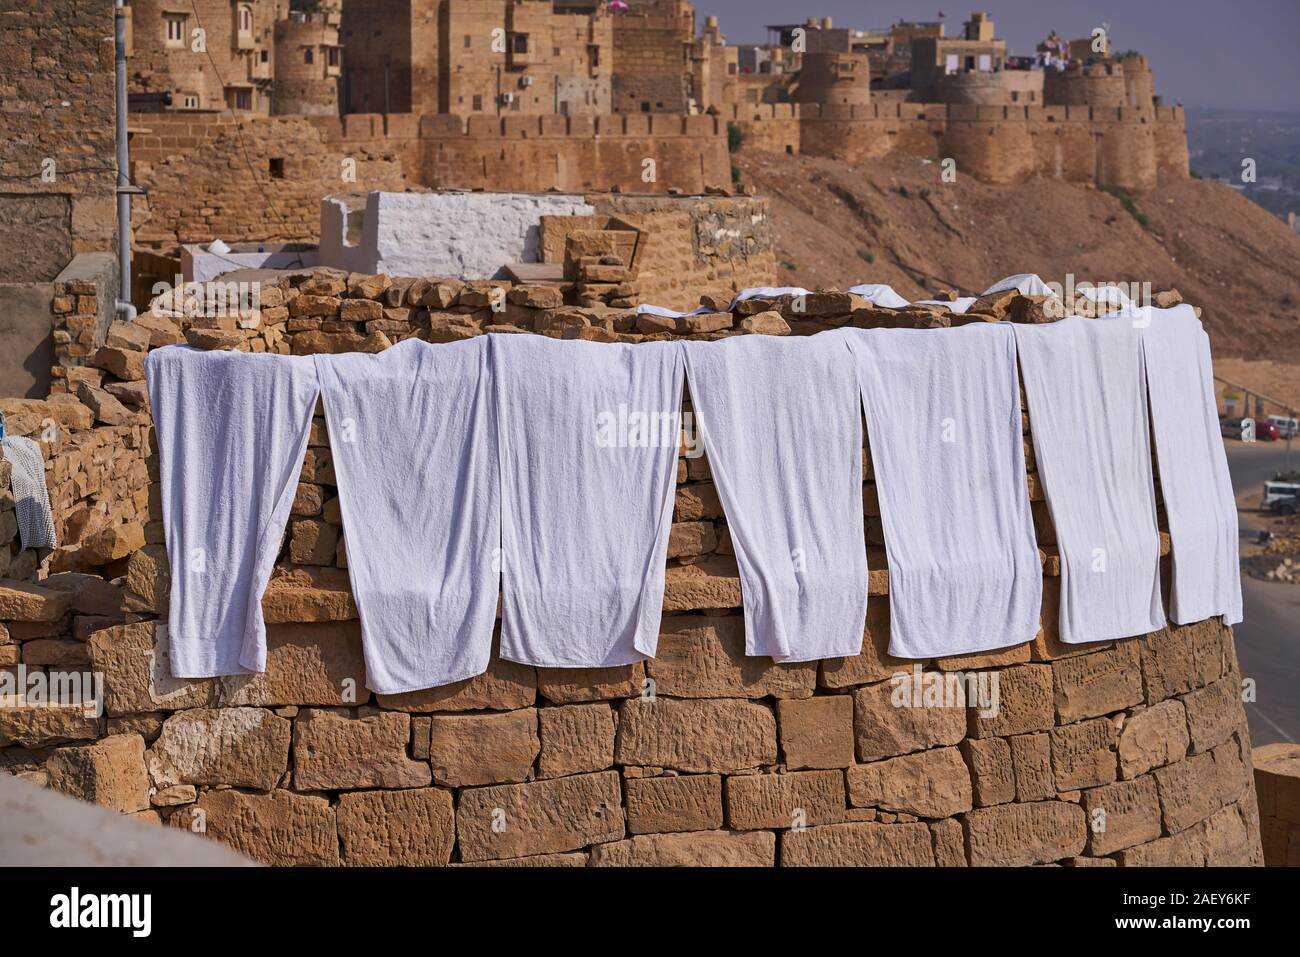 Washing hanging out to dry in the strong sun of Jaisalmer Stock Photo